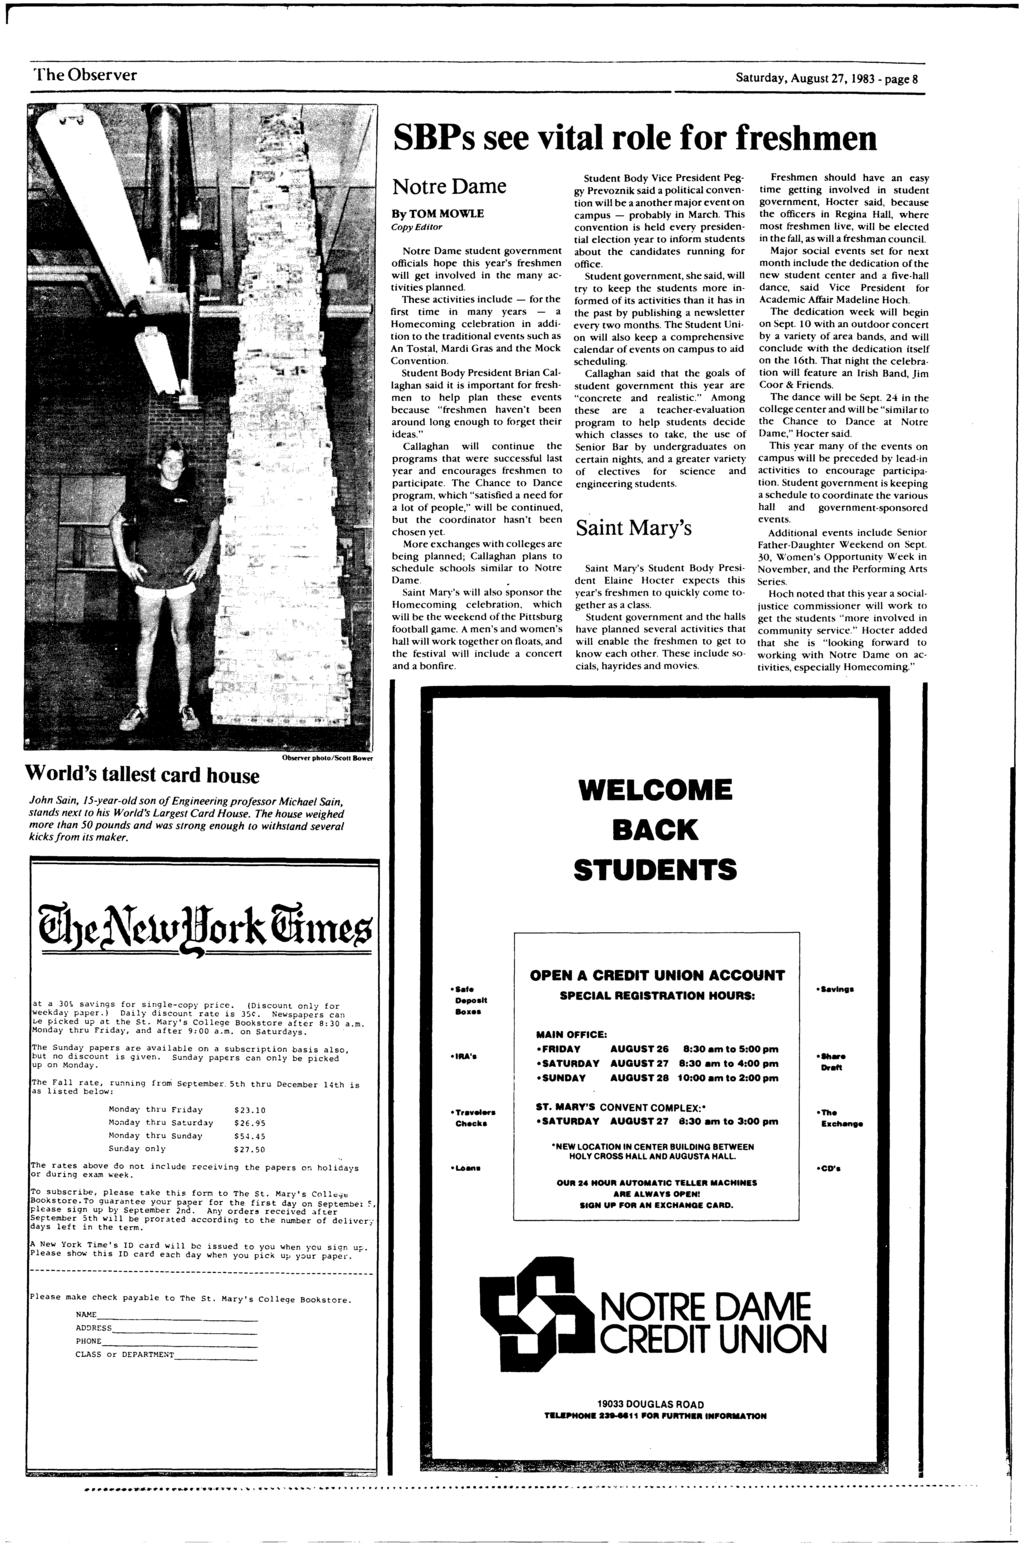 'The Observer Saurday, Augus 27, 1983 - page 8 SBPs see vial role for freshmen Nore Dame ByTOMMOWLE Copy Edior Nore Dame suden governmen officials hope his year's freshmen will ge involved in he many